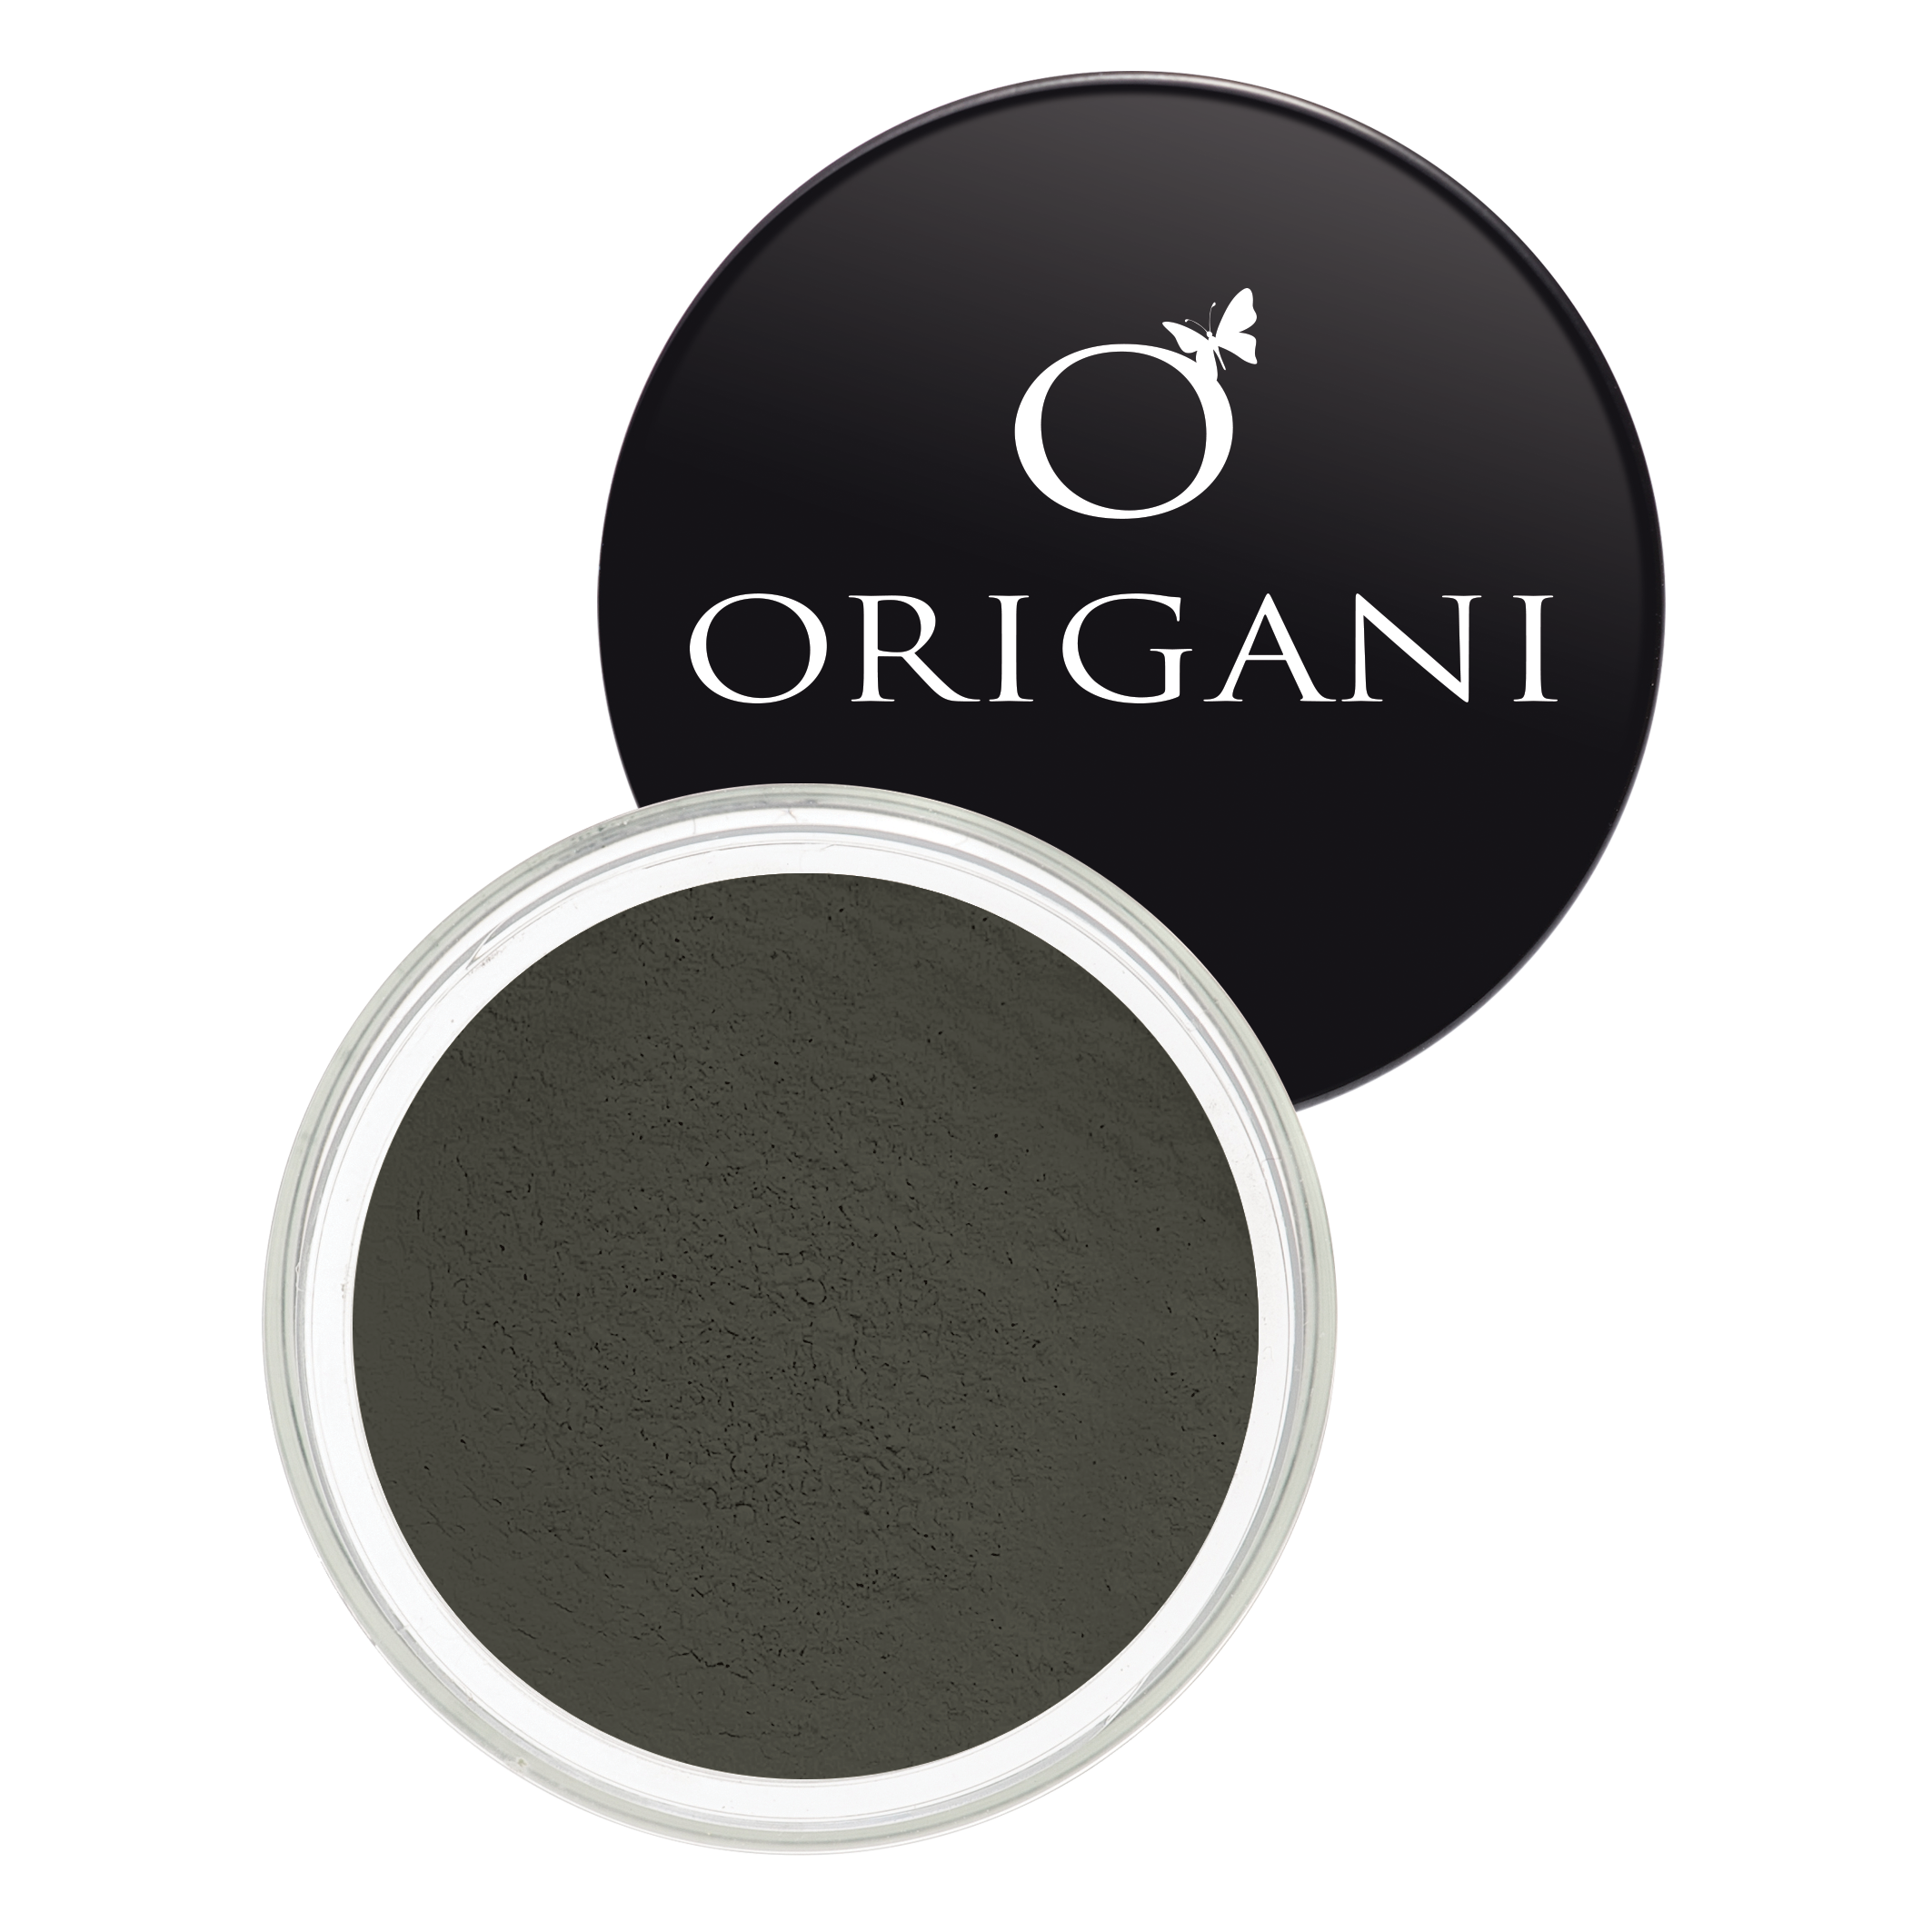 files/Origani-Mineral-Lover-Eye-Shadow-Wishing-Stone.png